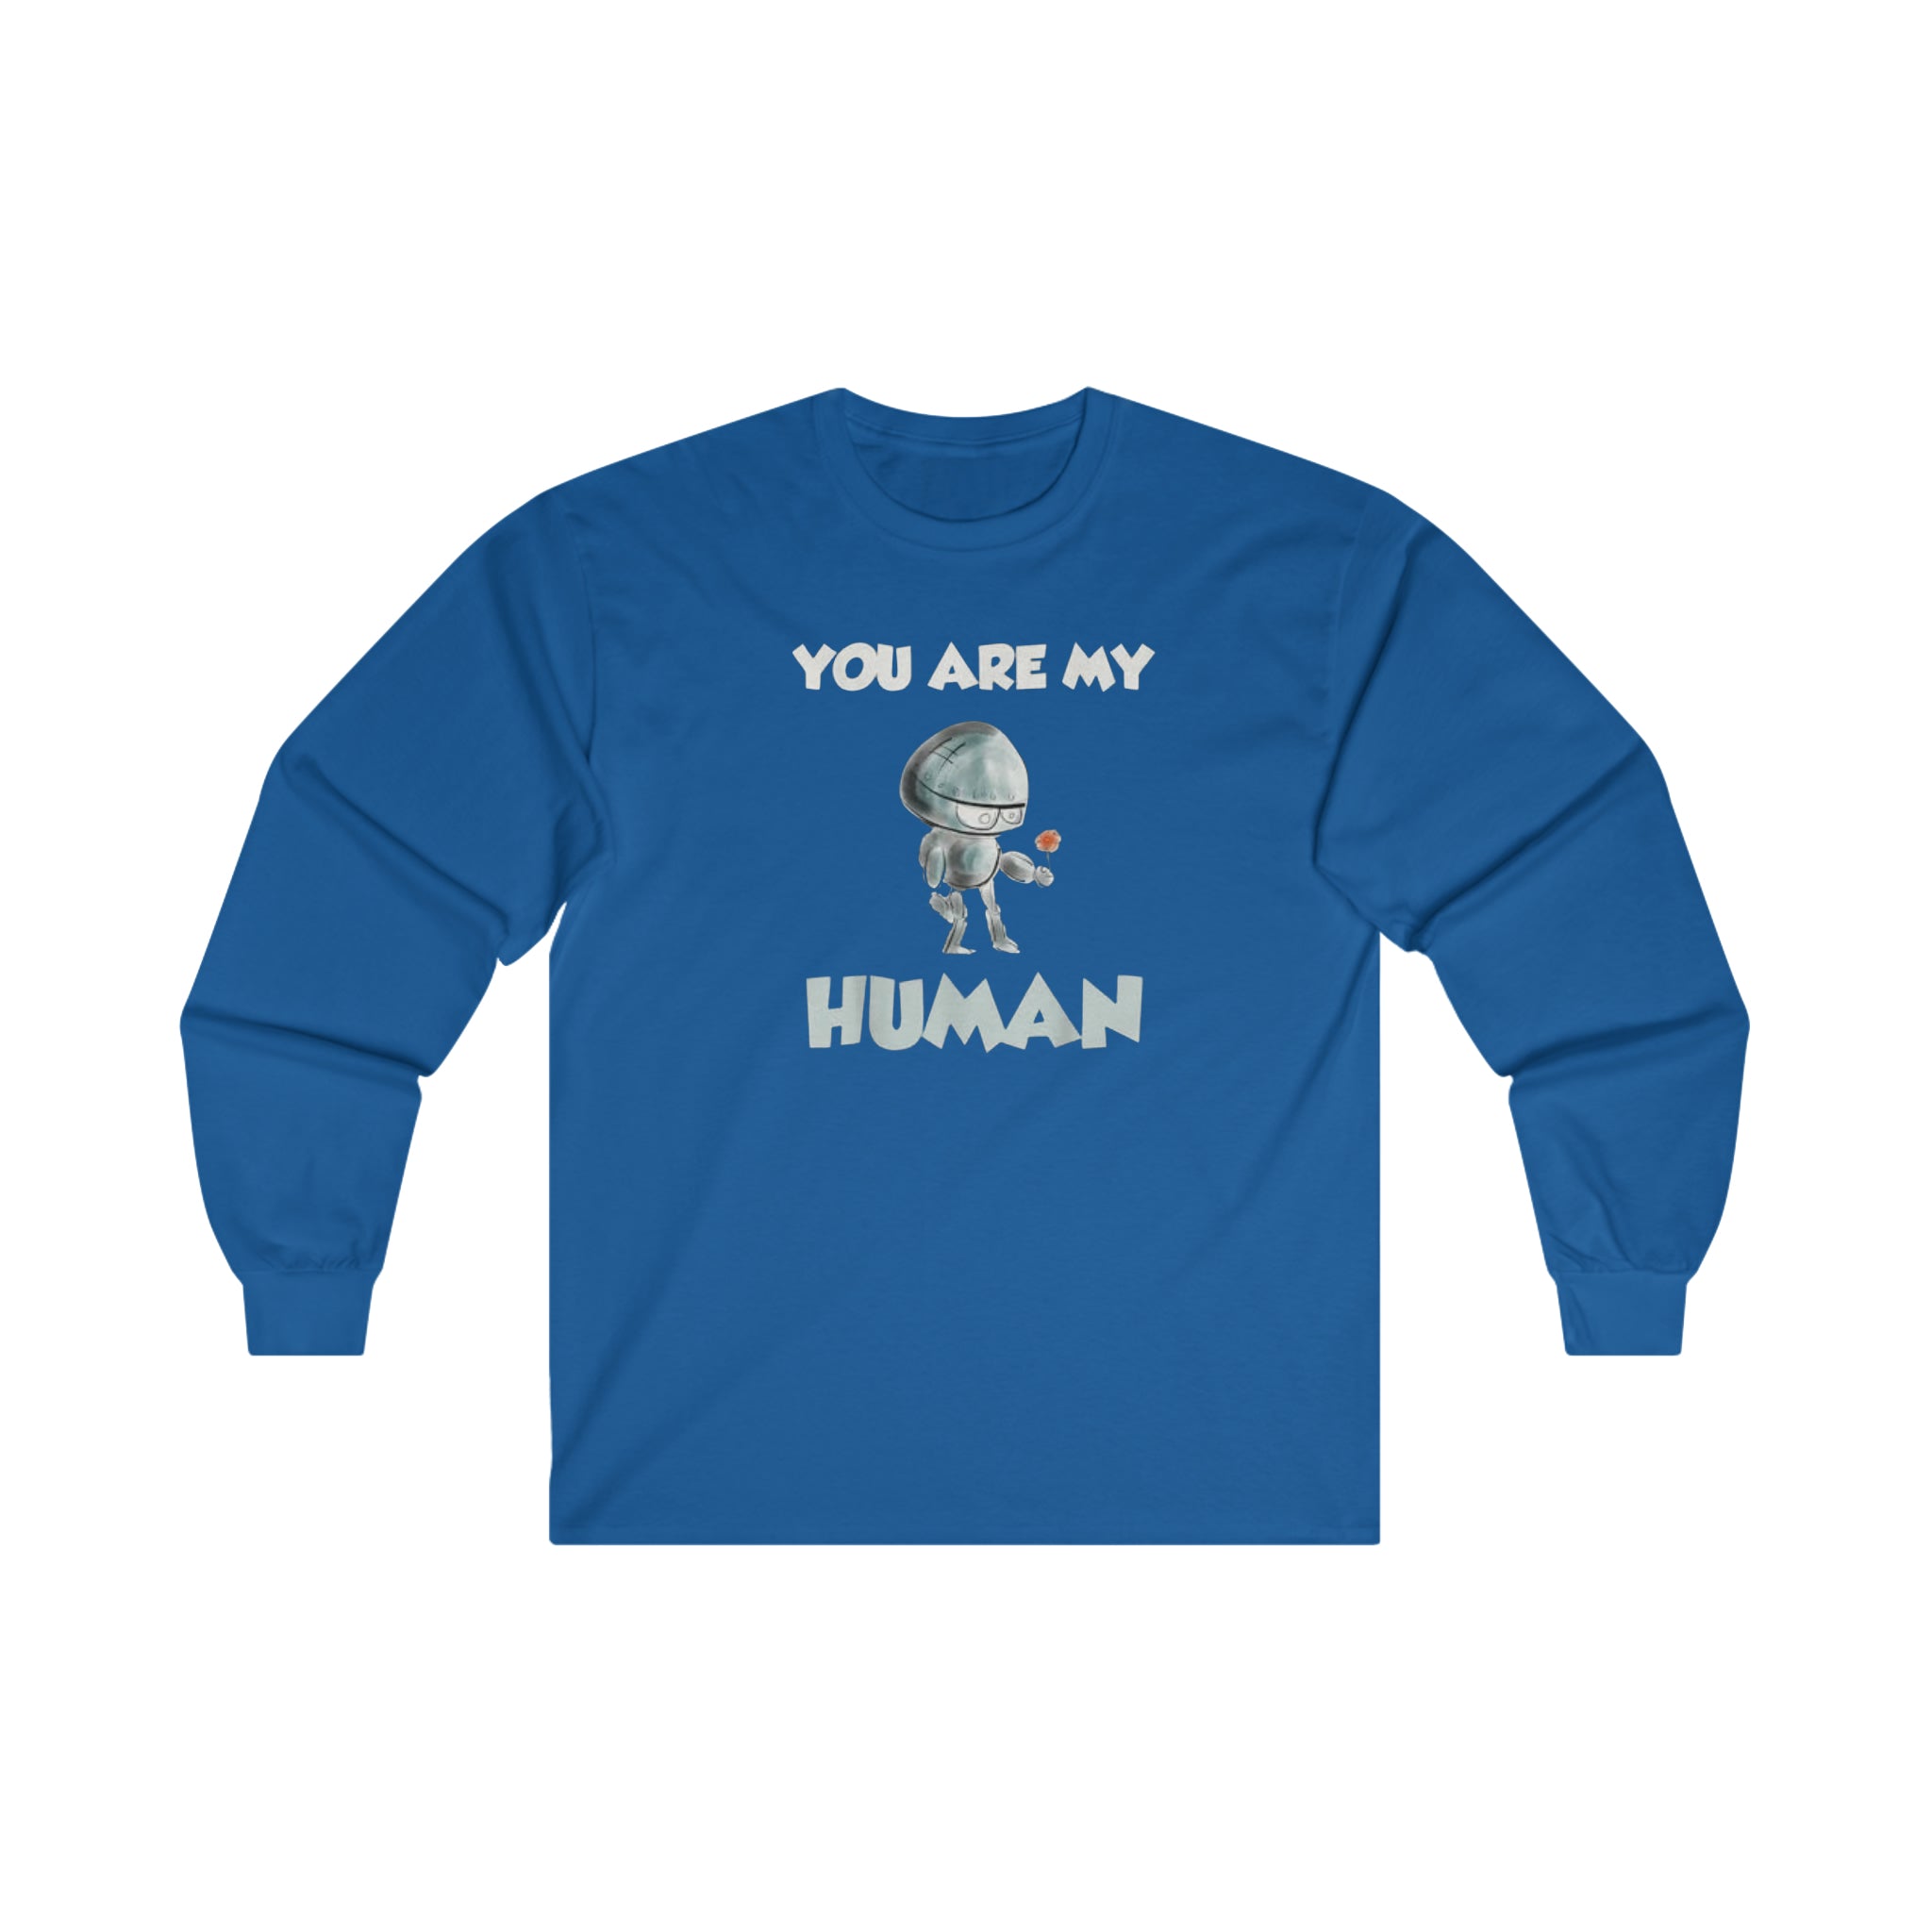 You Are My Human Valentine's Long-Sleeve T-Shirt